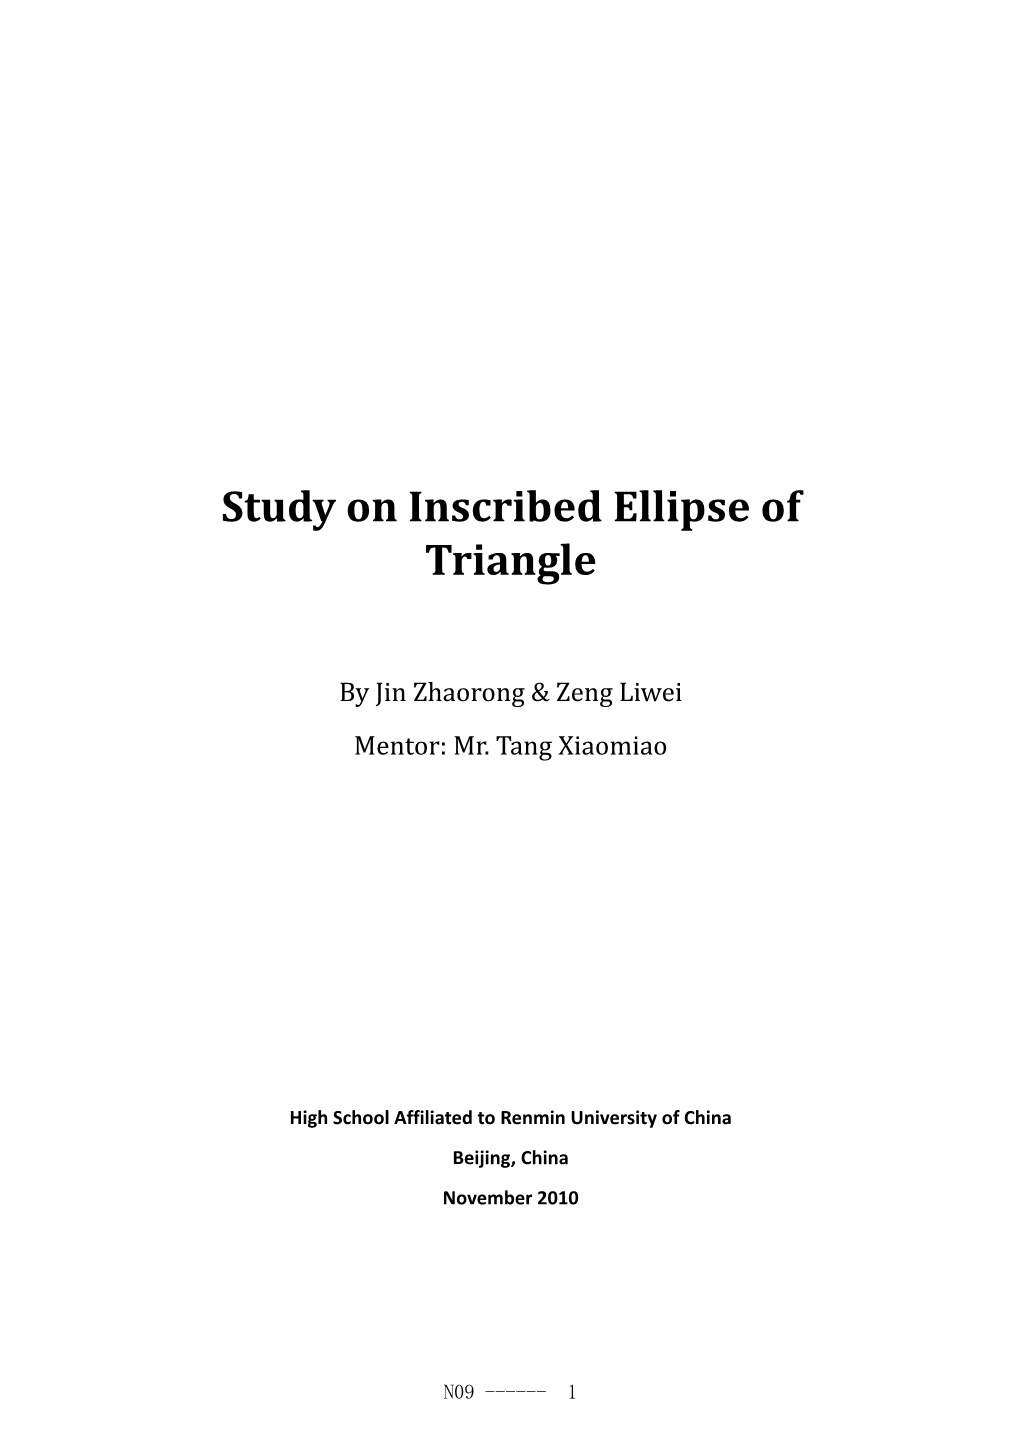 D:\Jinzhaorong\数学论文\Study on Inscribed Ellipse of Triangle.Xps